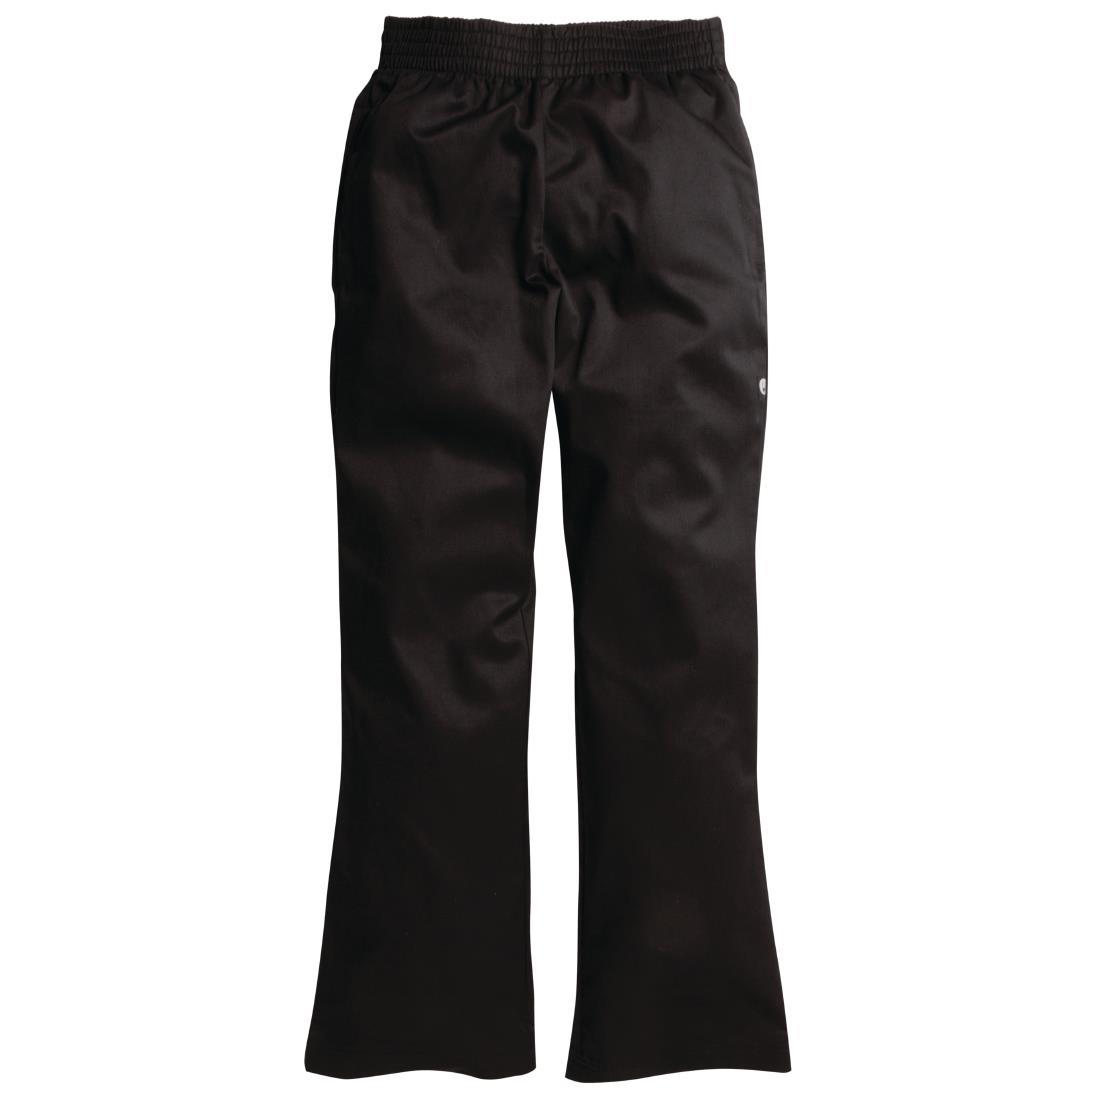 Chef Works Womens Basic Baggy Chefs Trousers Black S - B223-S  - 2